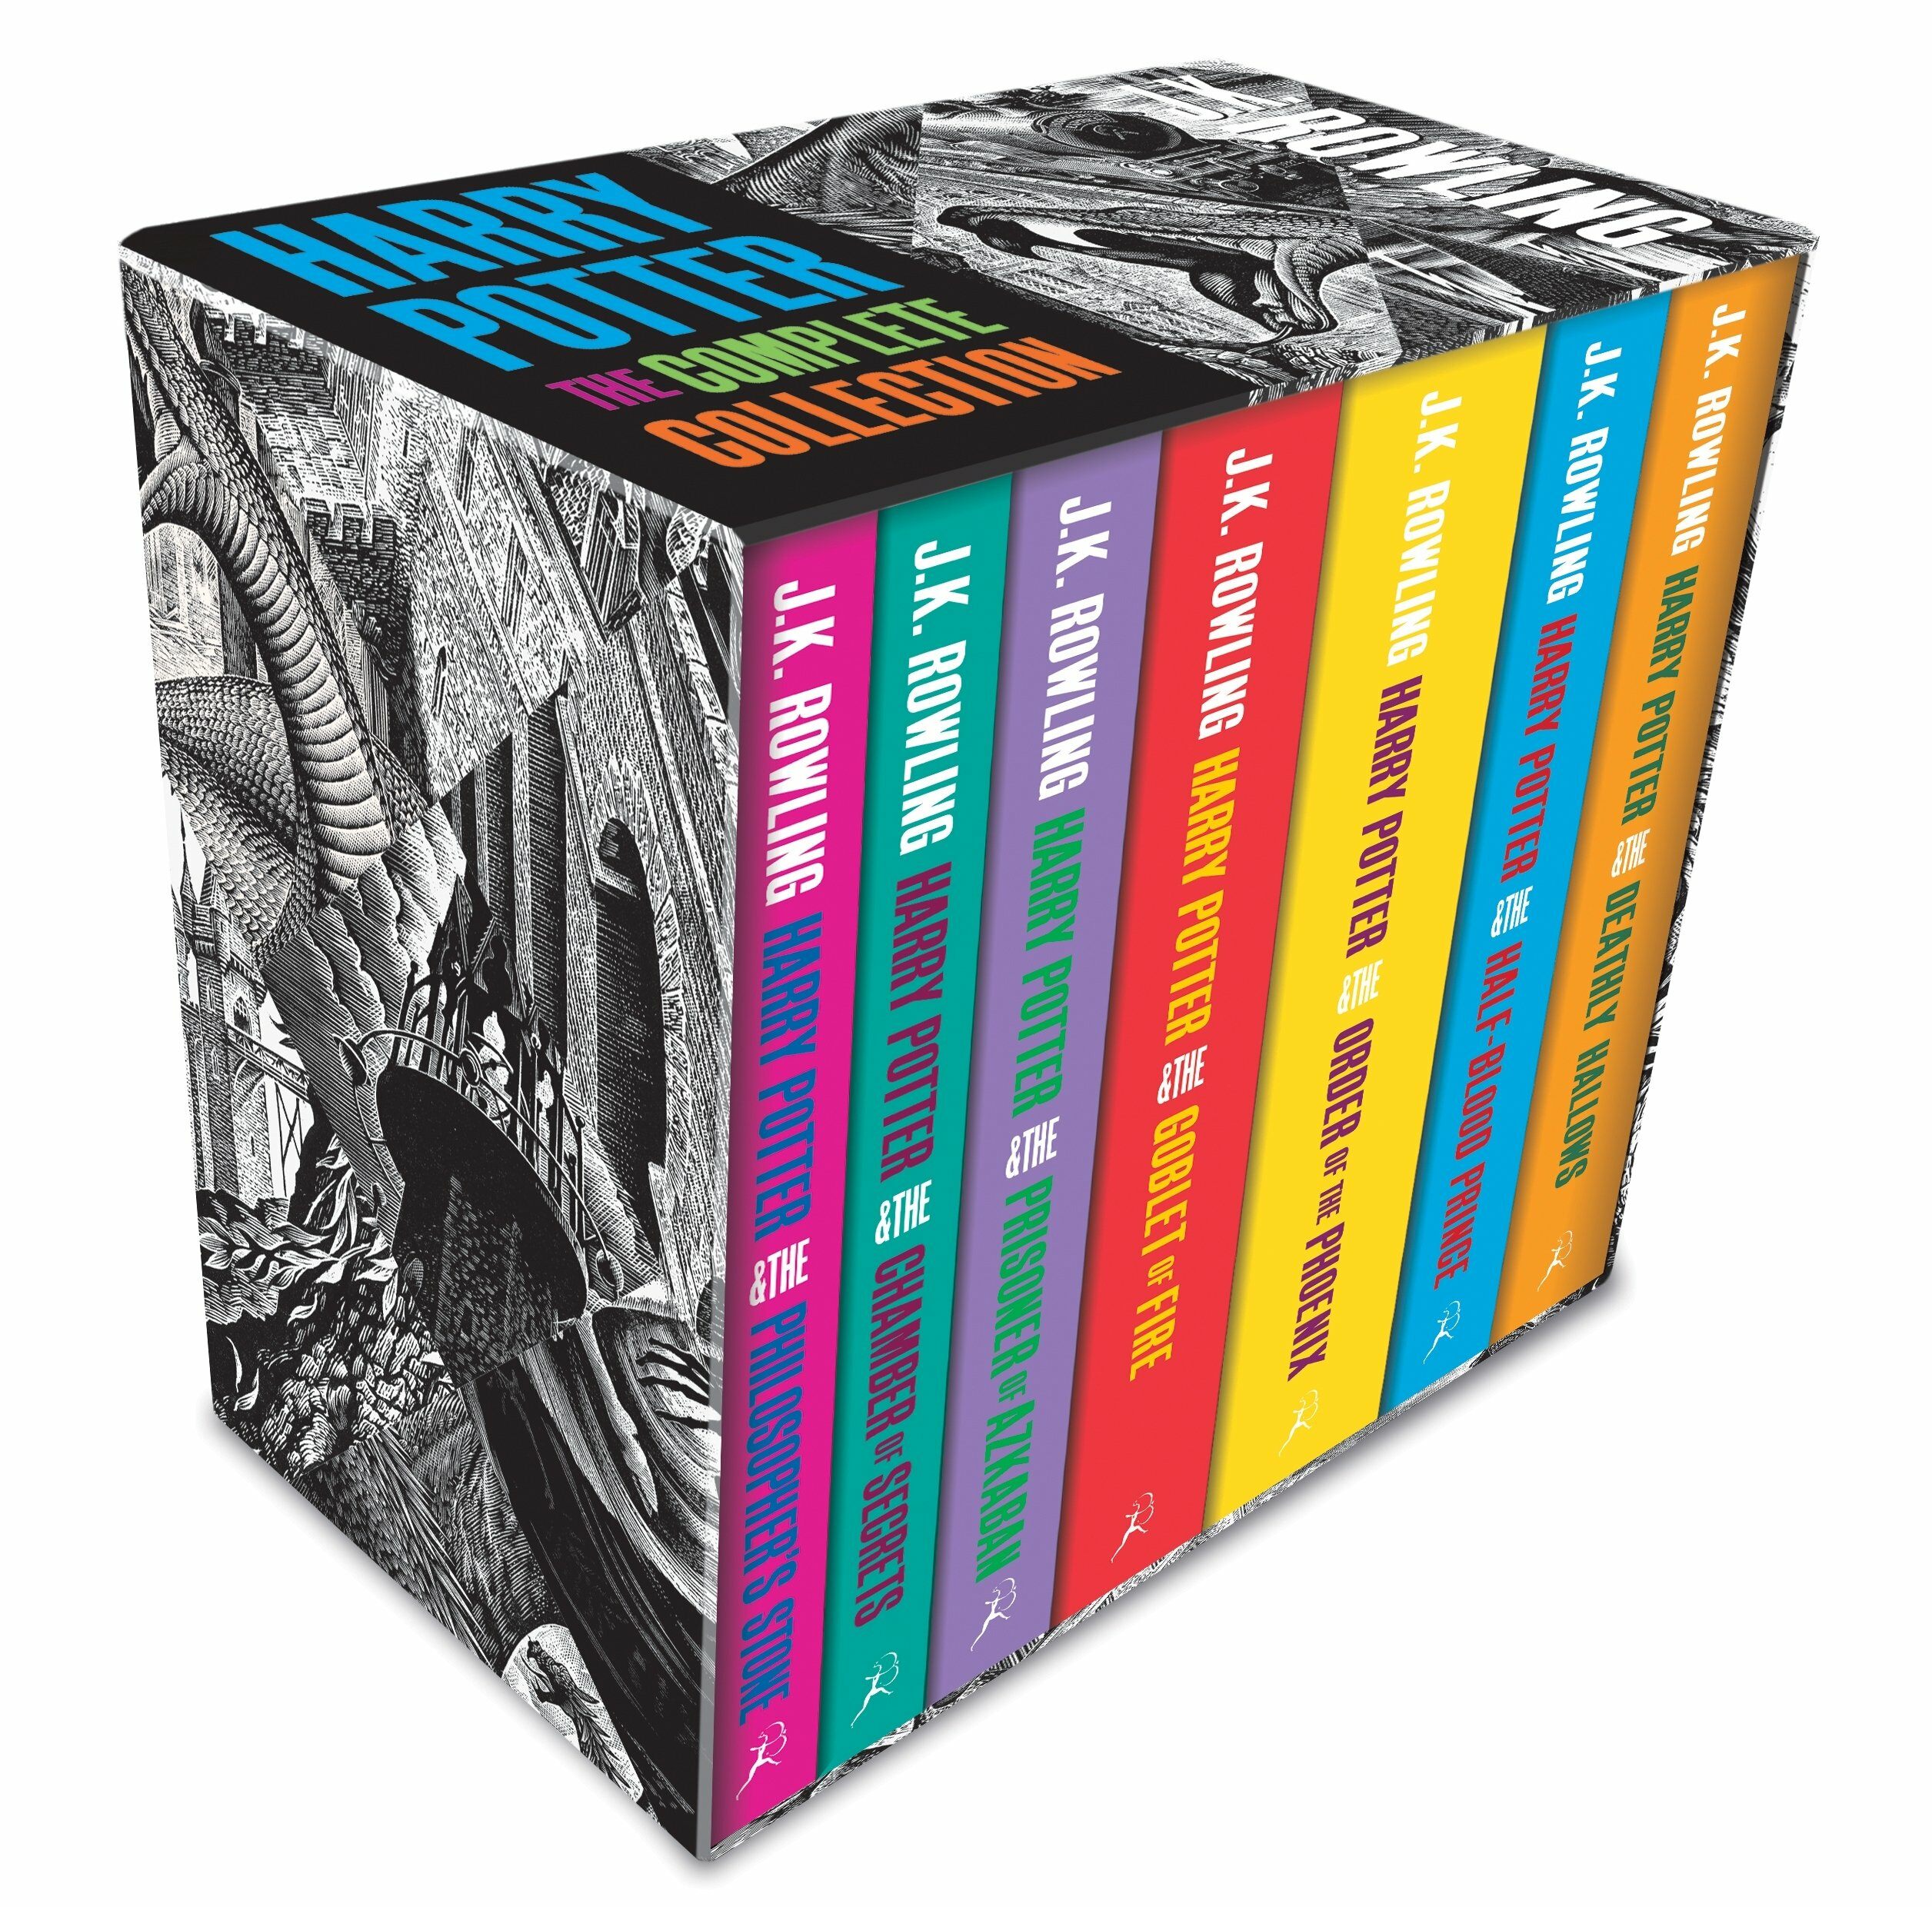 Harry Potter Boxed Set: The Complete Collection (Adult Paperback) (Multiple-component retail product)